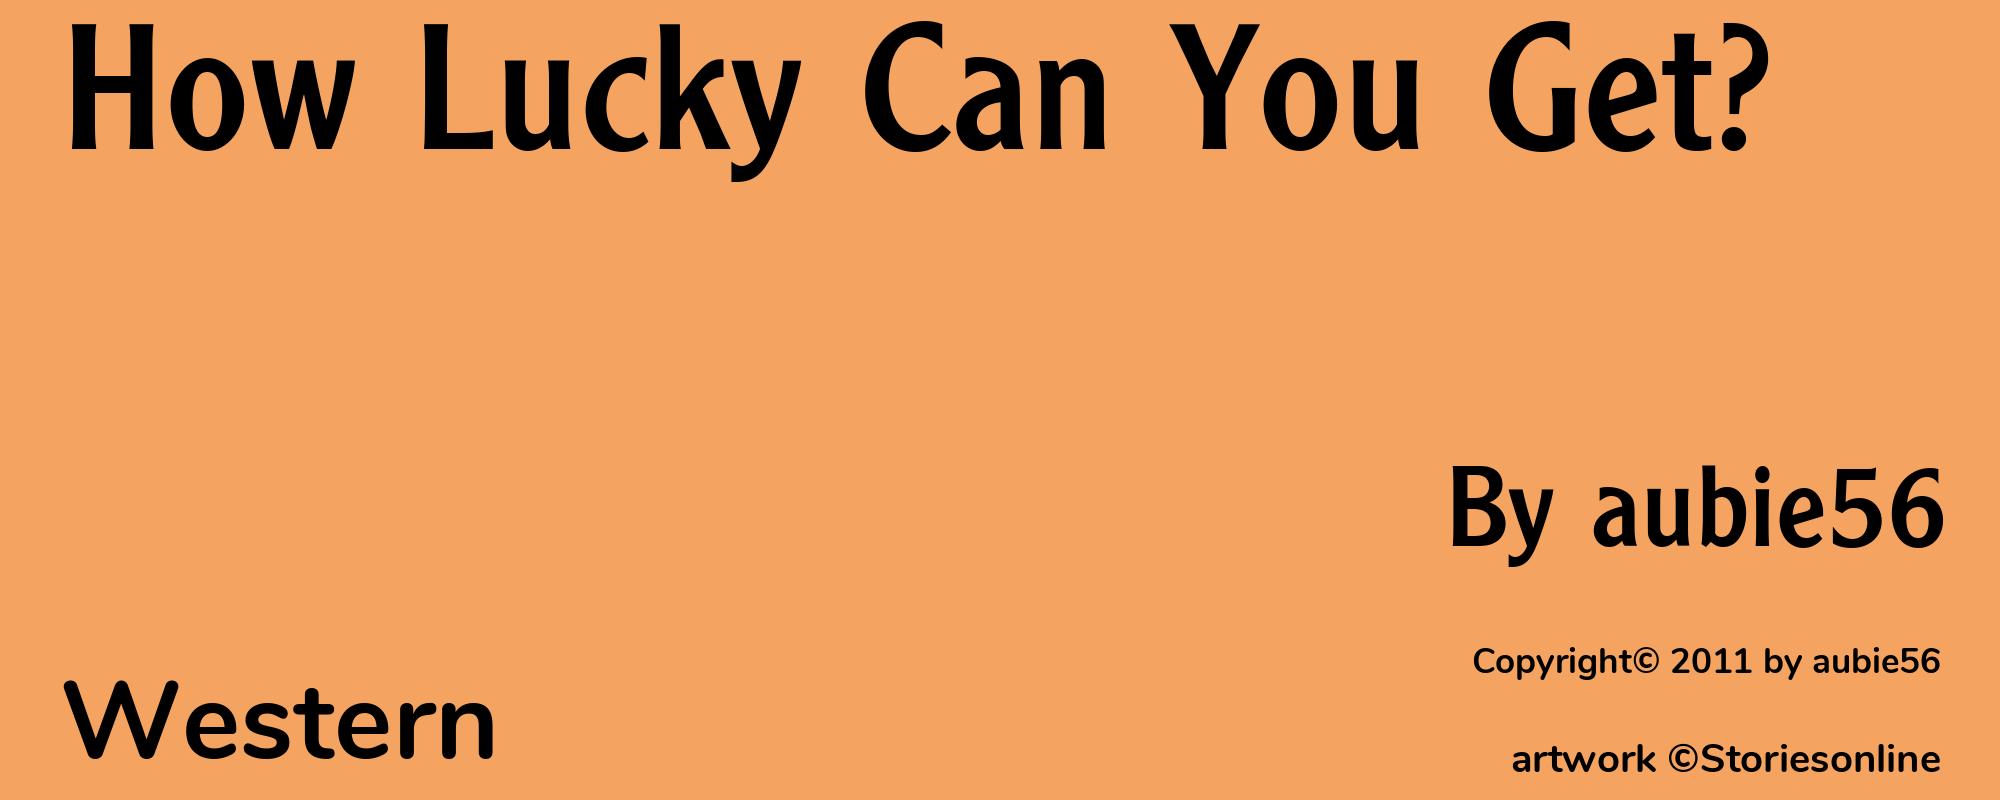 How Lucky Can You Get? - Cover